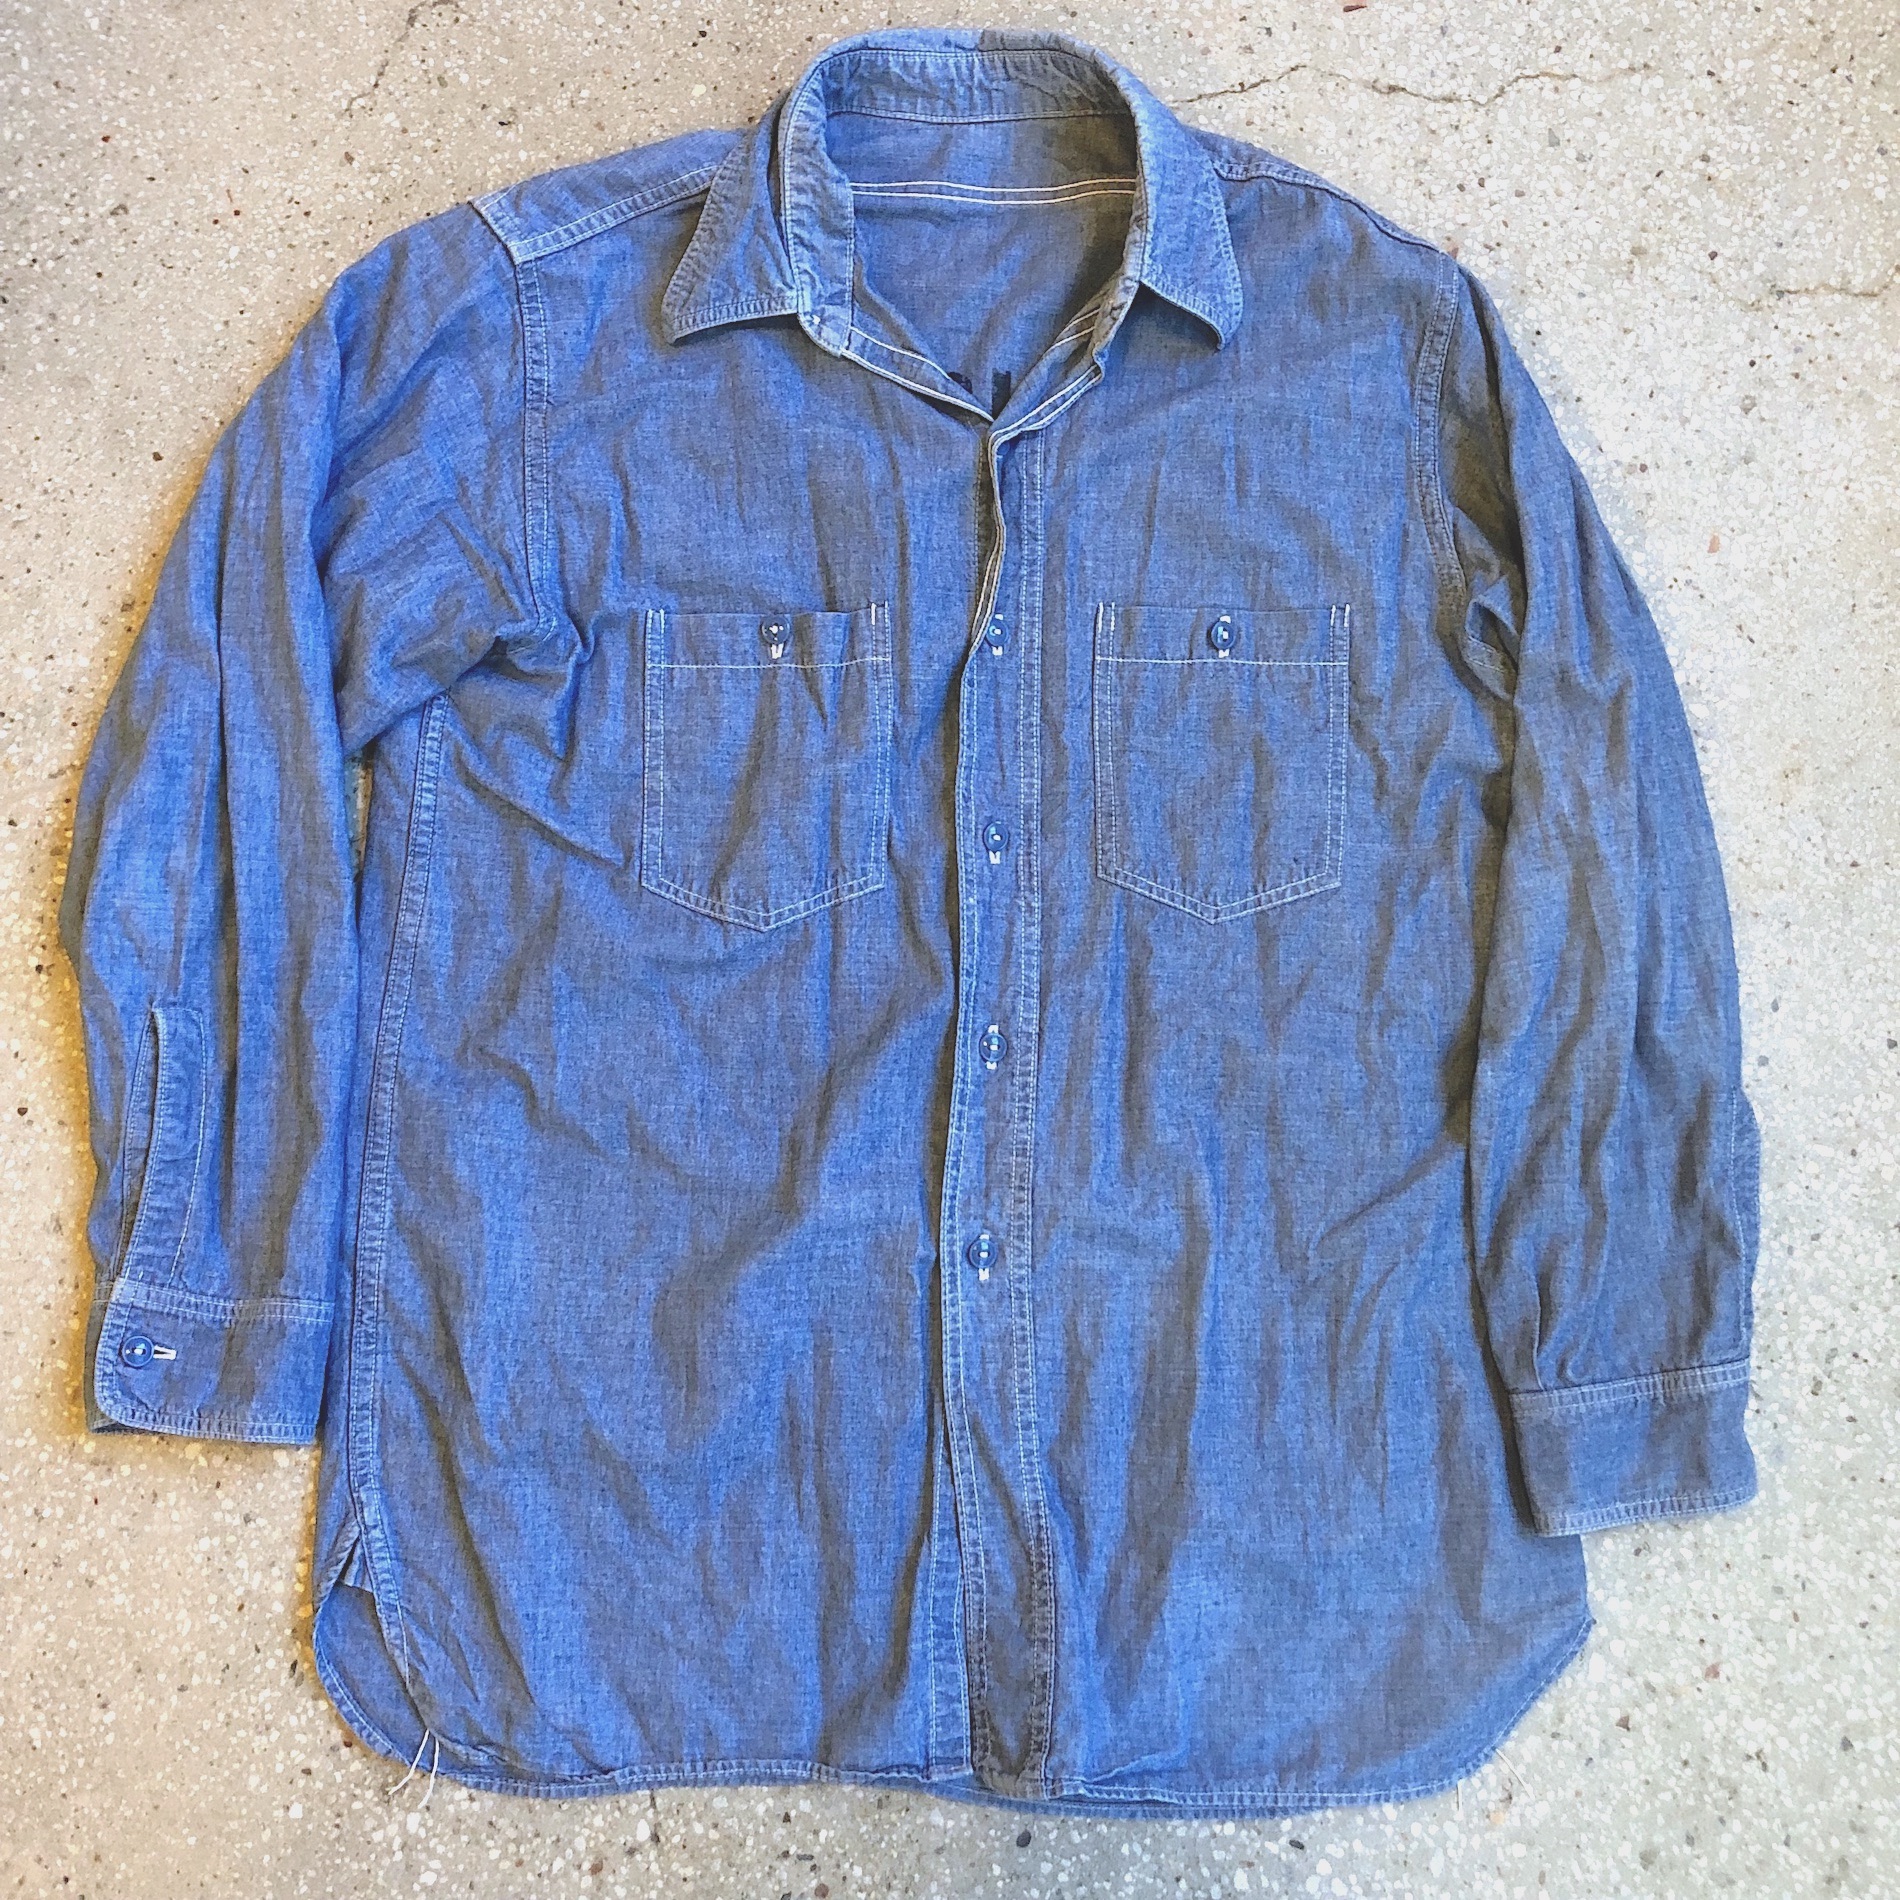 Chambray work shirts | Vintage Leather Jackets Forum